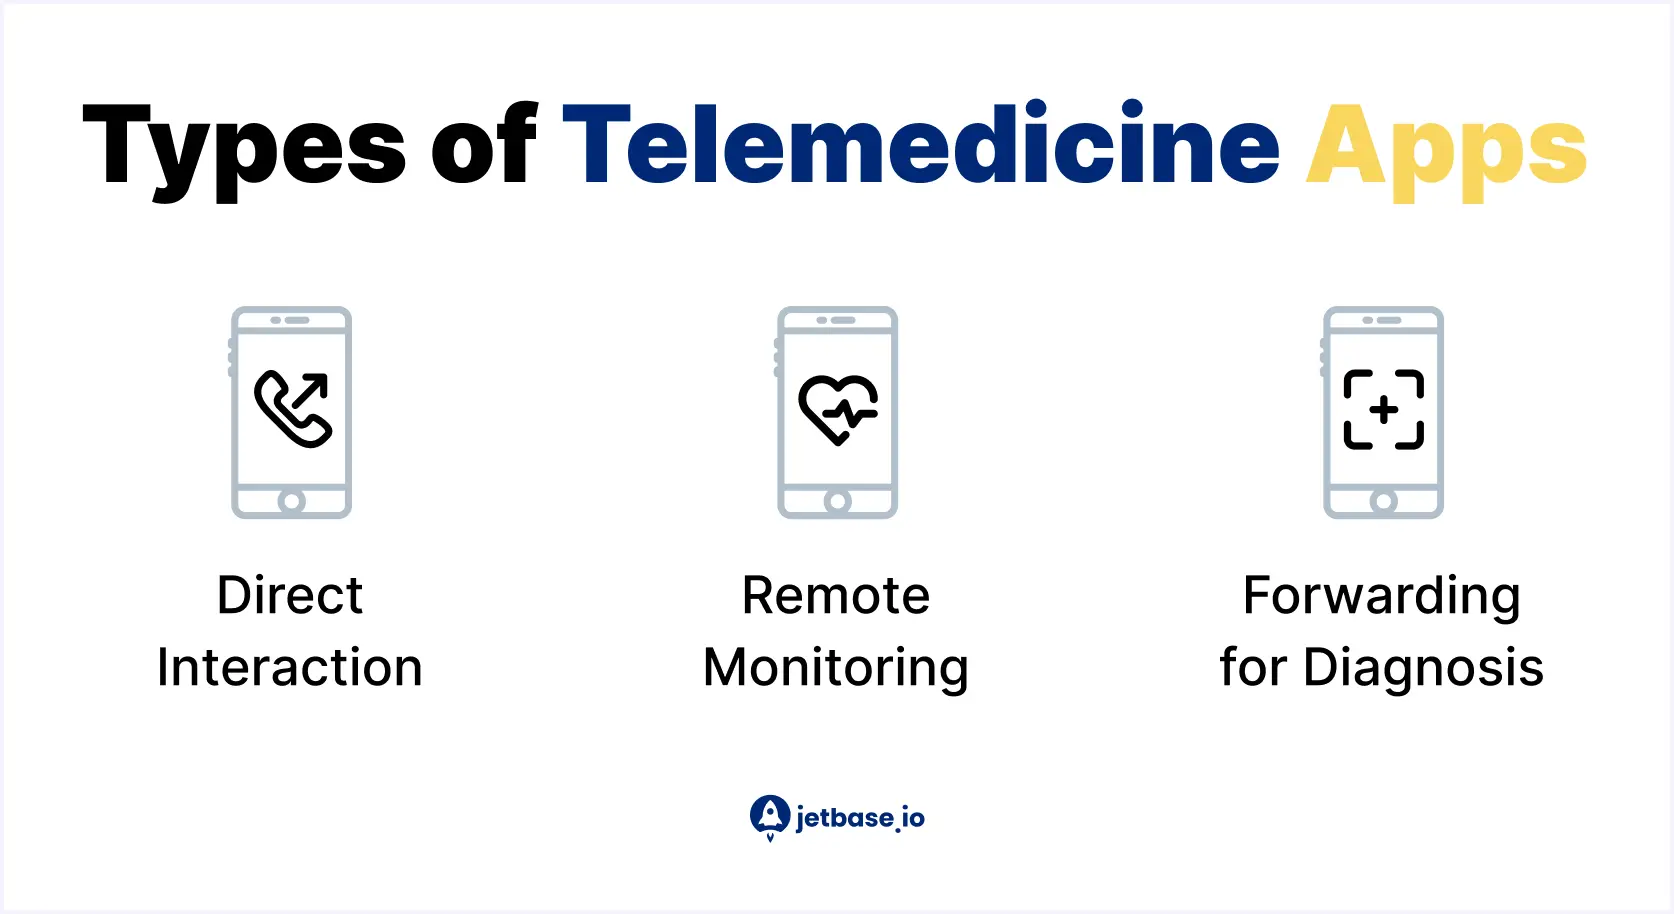 What Are The Types Of Telemedicine Apps?